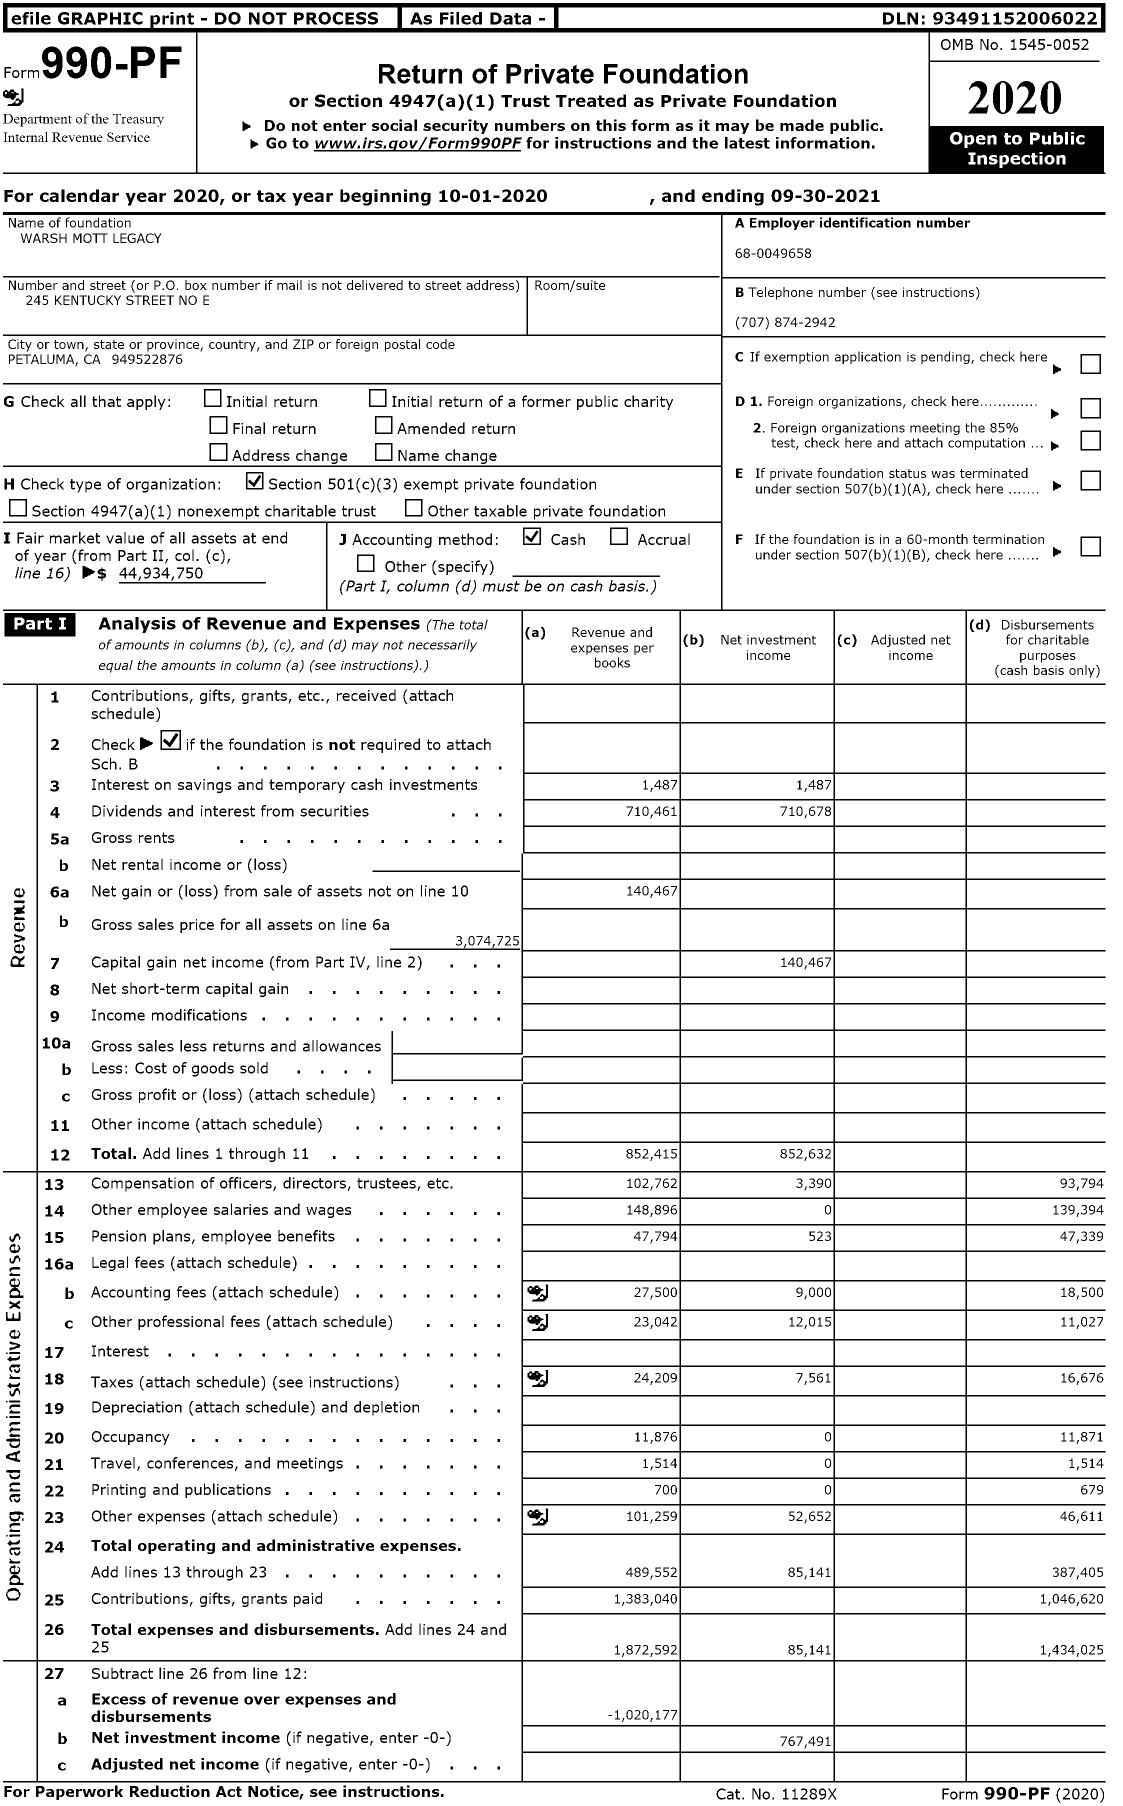 Image of first page of 2020 Form 990PF for CS Fund and Warsh-Mott Legacy (csf/wml)